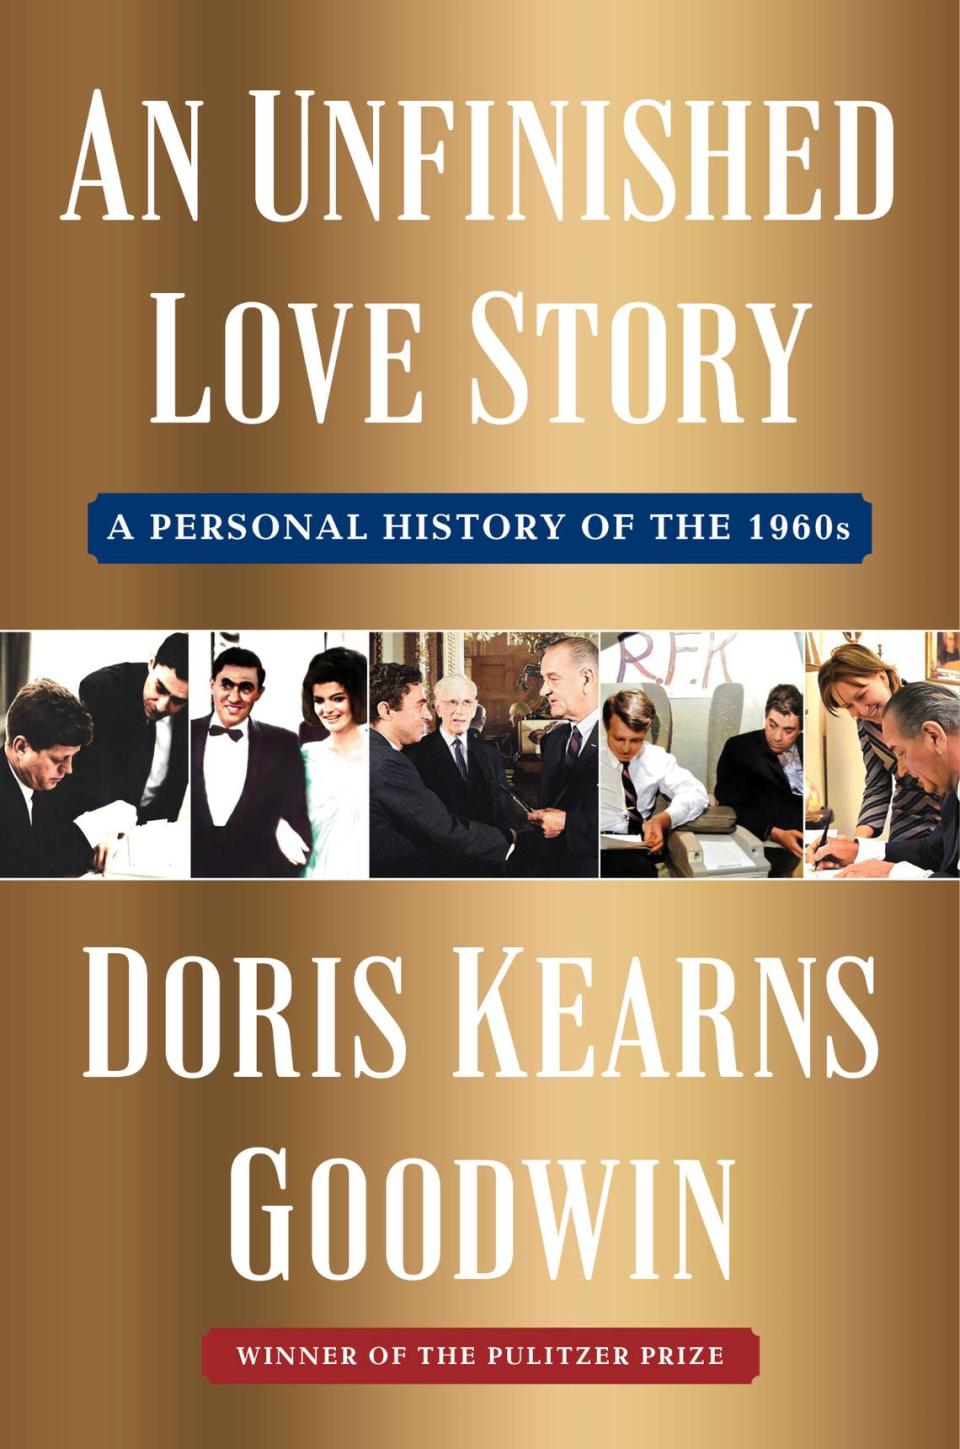 “An Unfinished Love Story: A Personal History of the 1960s,” which is Doris Kearns Goodwin’s eighth book, focuses on her late husband, Richard Goodwin.